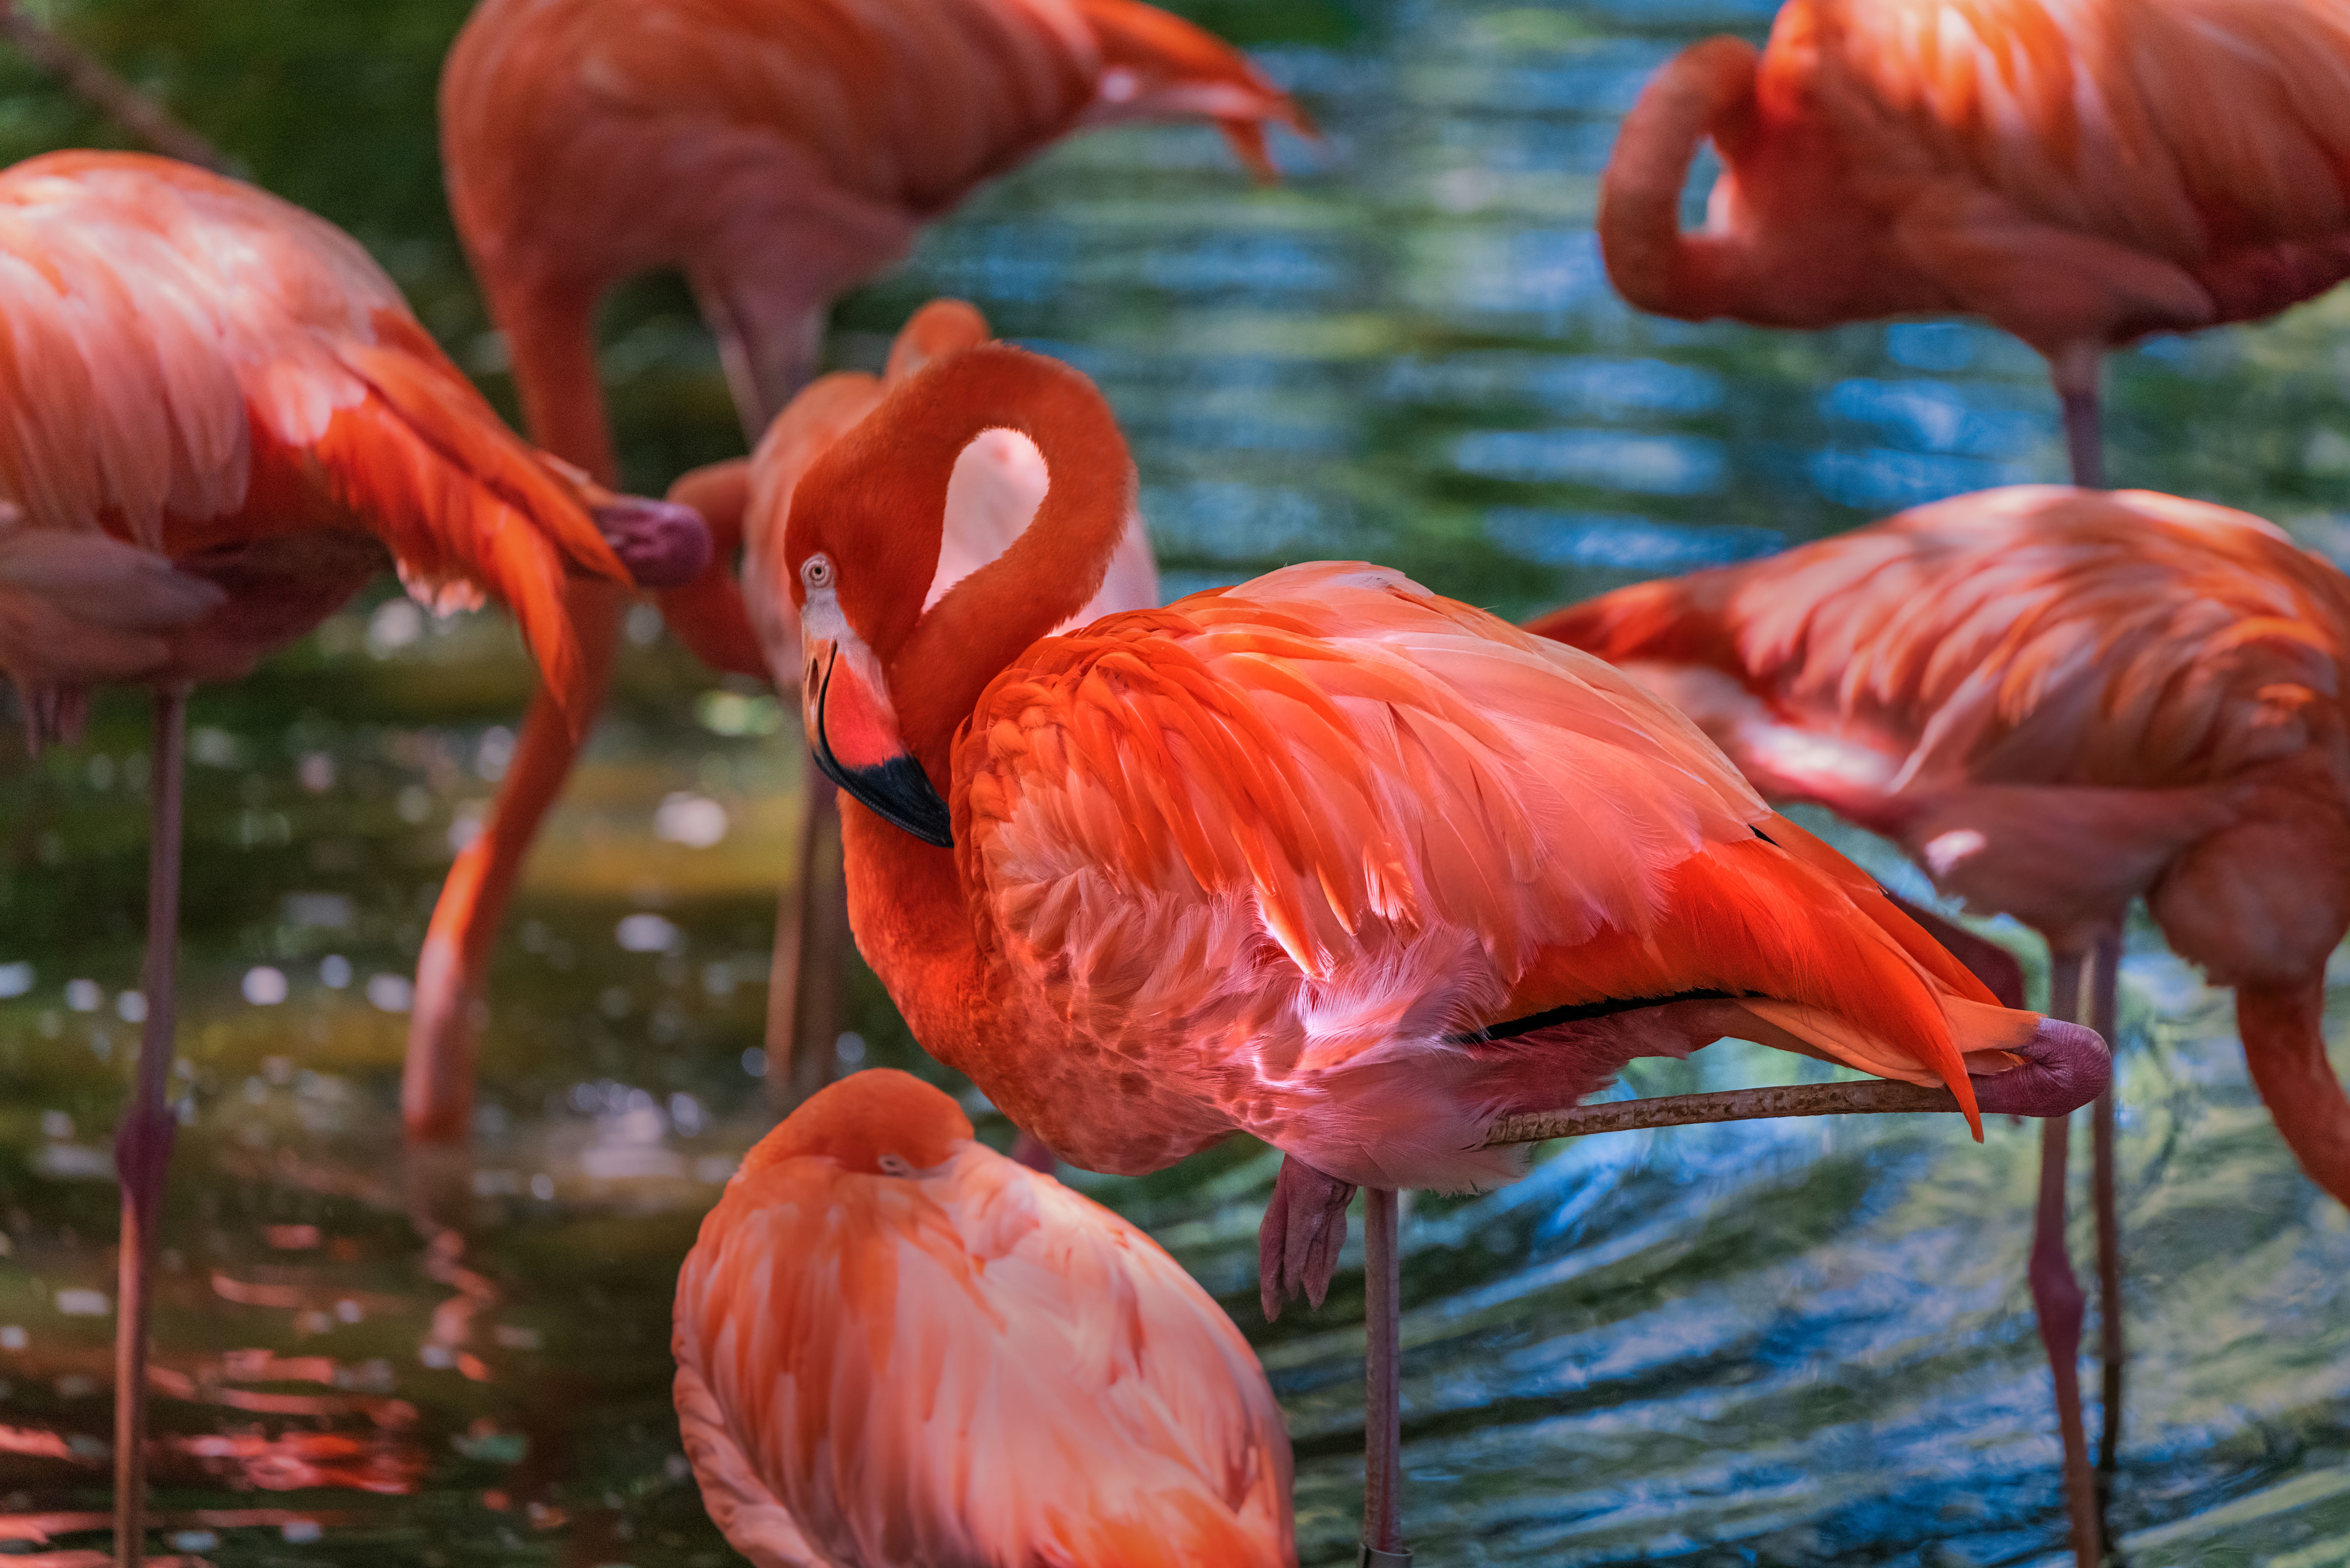 A group of flamingos stand in shallow water, some resting on one leg. The focus is on one flamingo preening its feathers with its beak